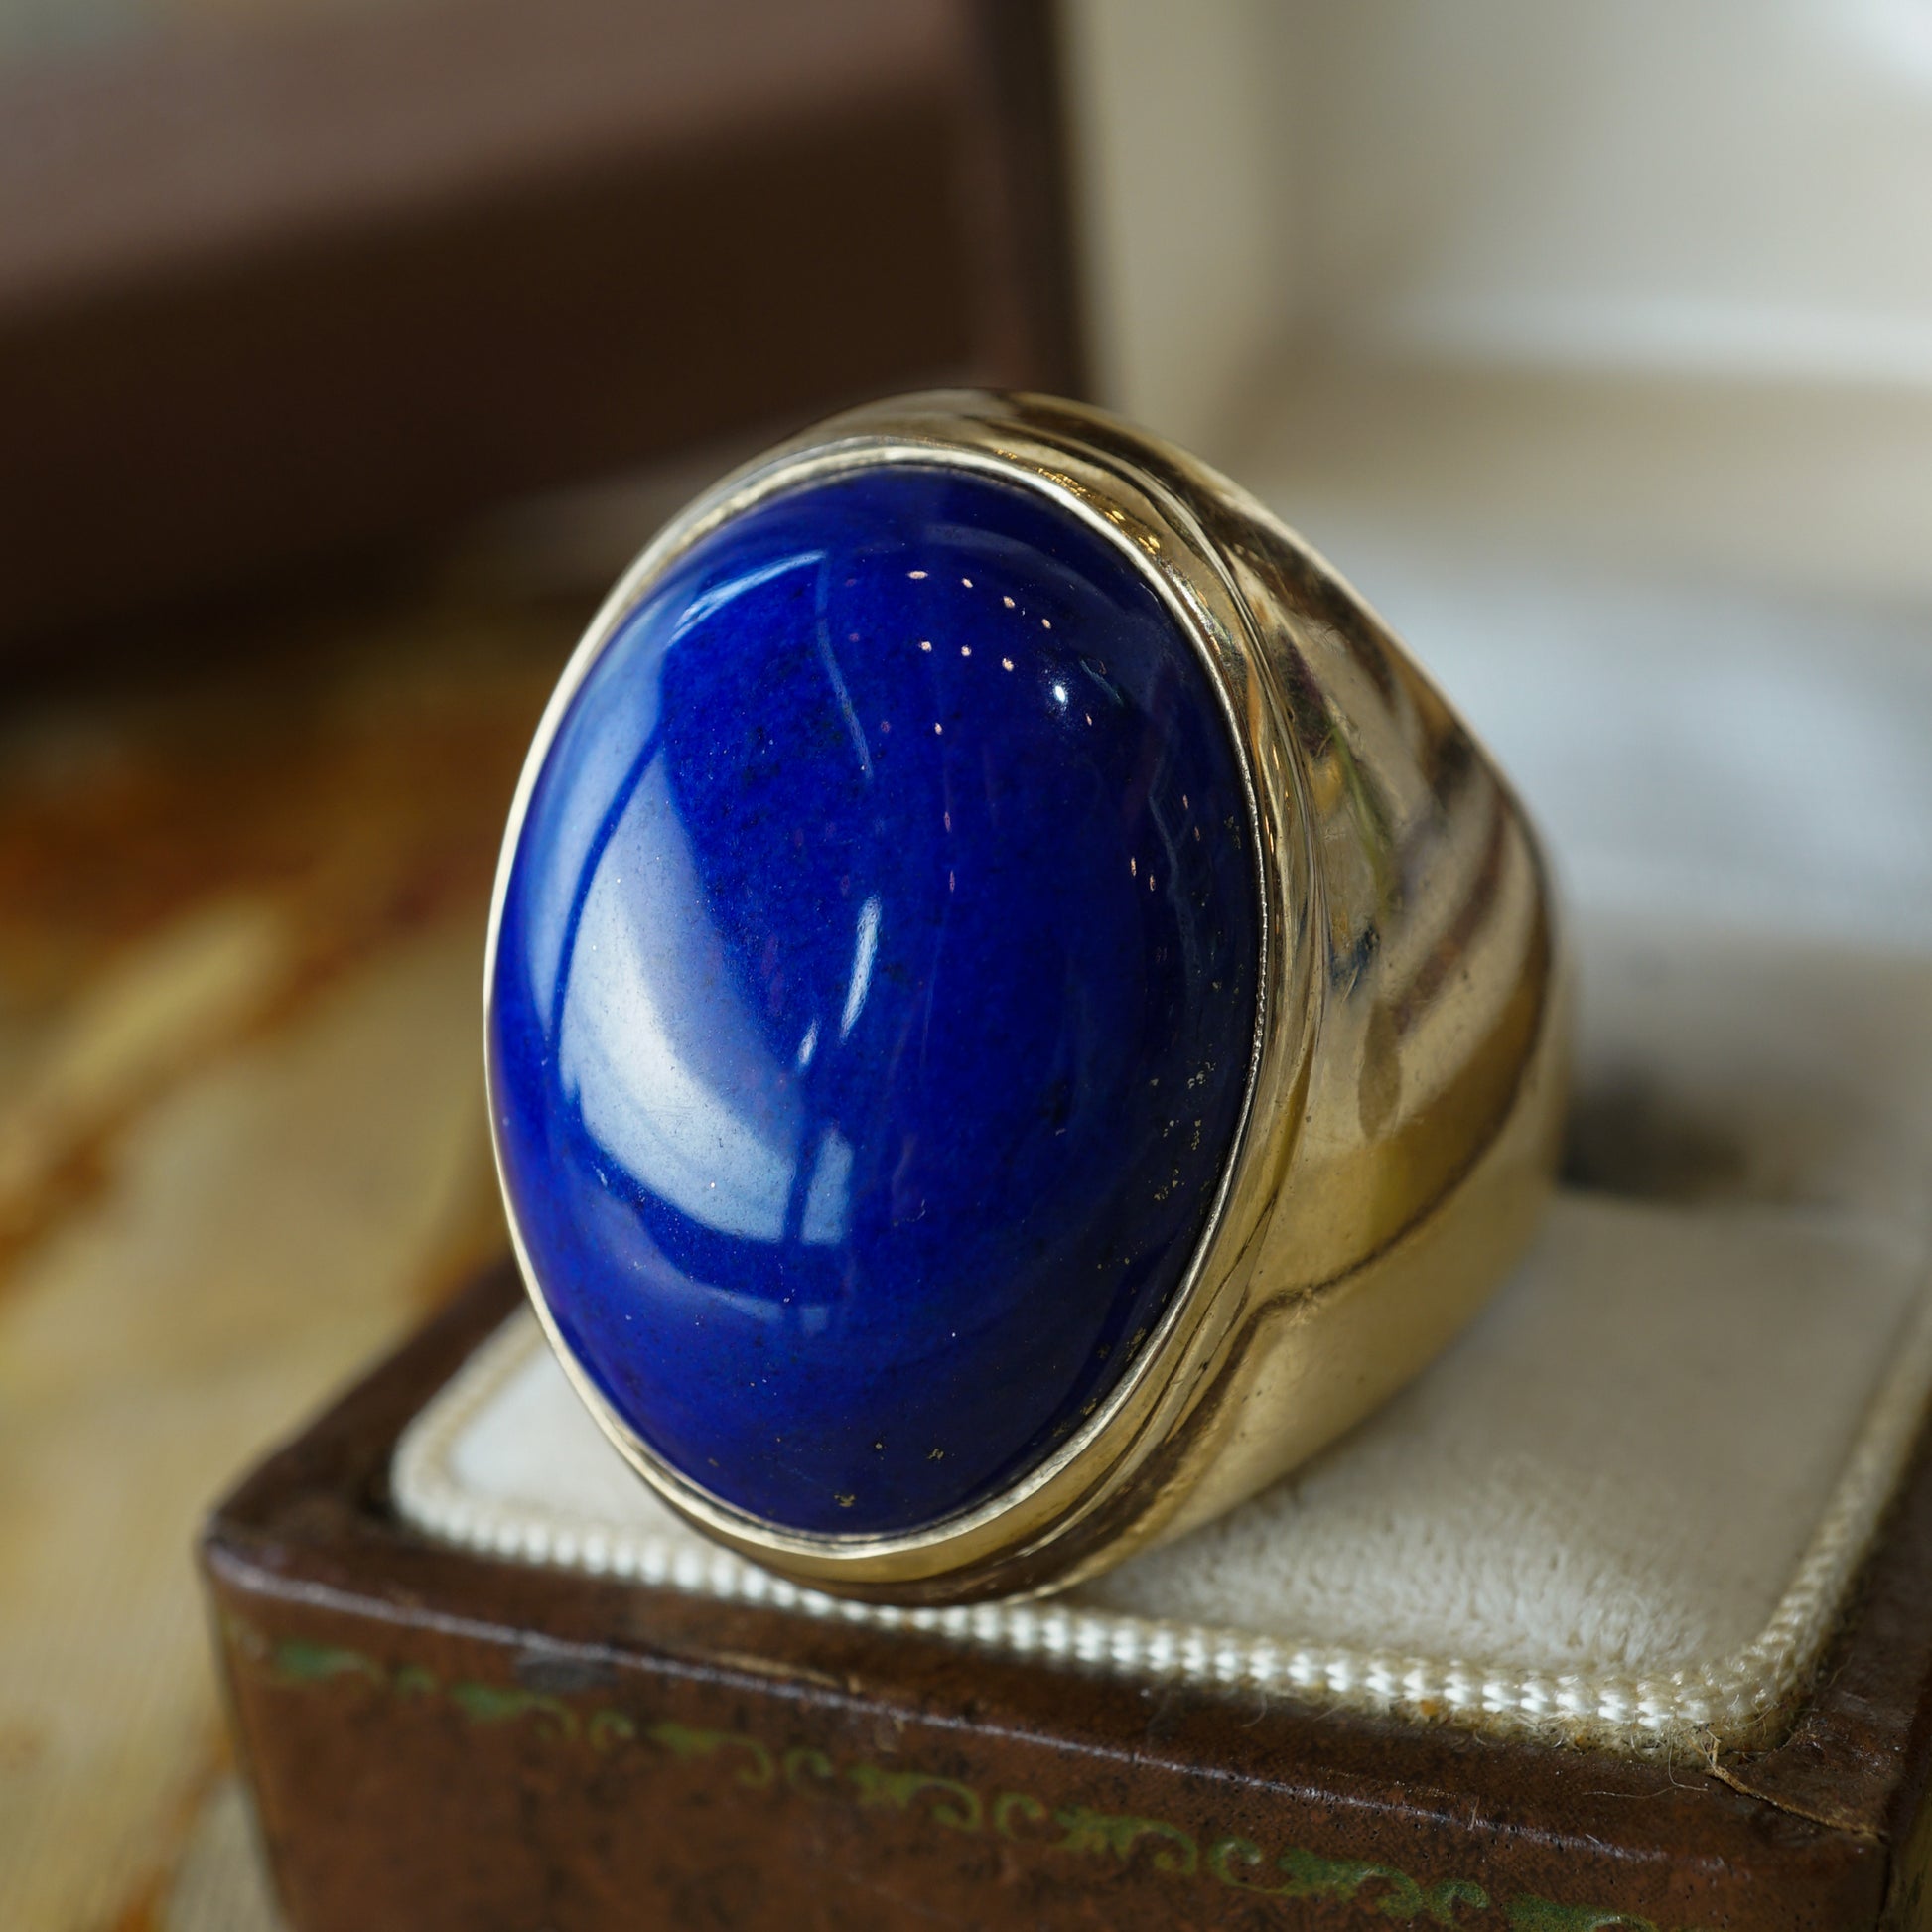 Oval Lapis Lazuli Cocktail Ring in 14k Yellow GoldComposition: 14 Karat Yellow Gold Ring Size: 9.5 Total Gram Weight: 21.1 g